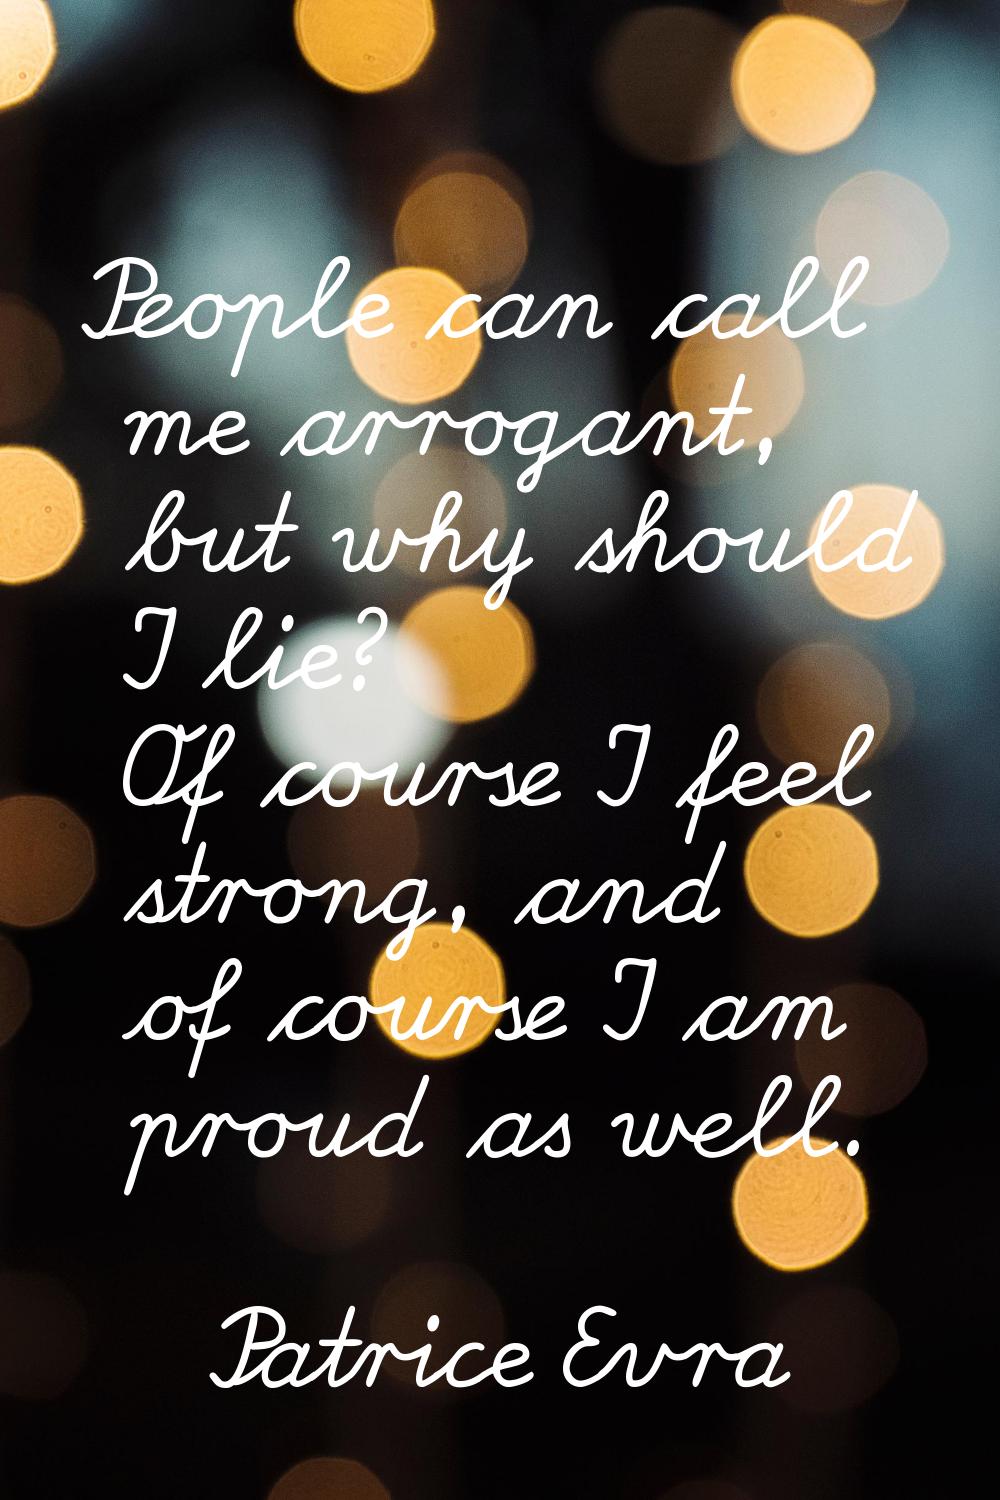 People can call me arrogant, but why should I lie? Of course I feel strong, and of course I am prou